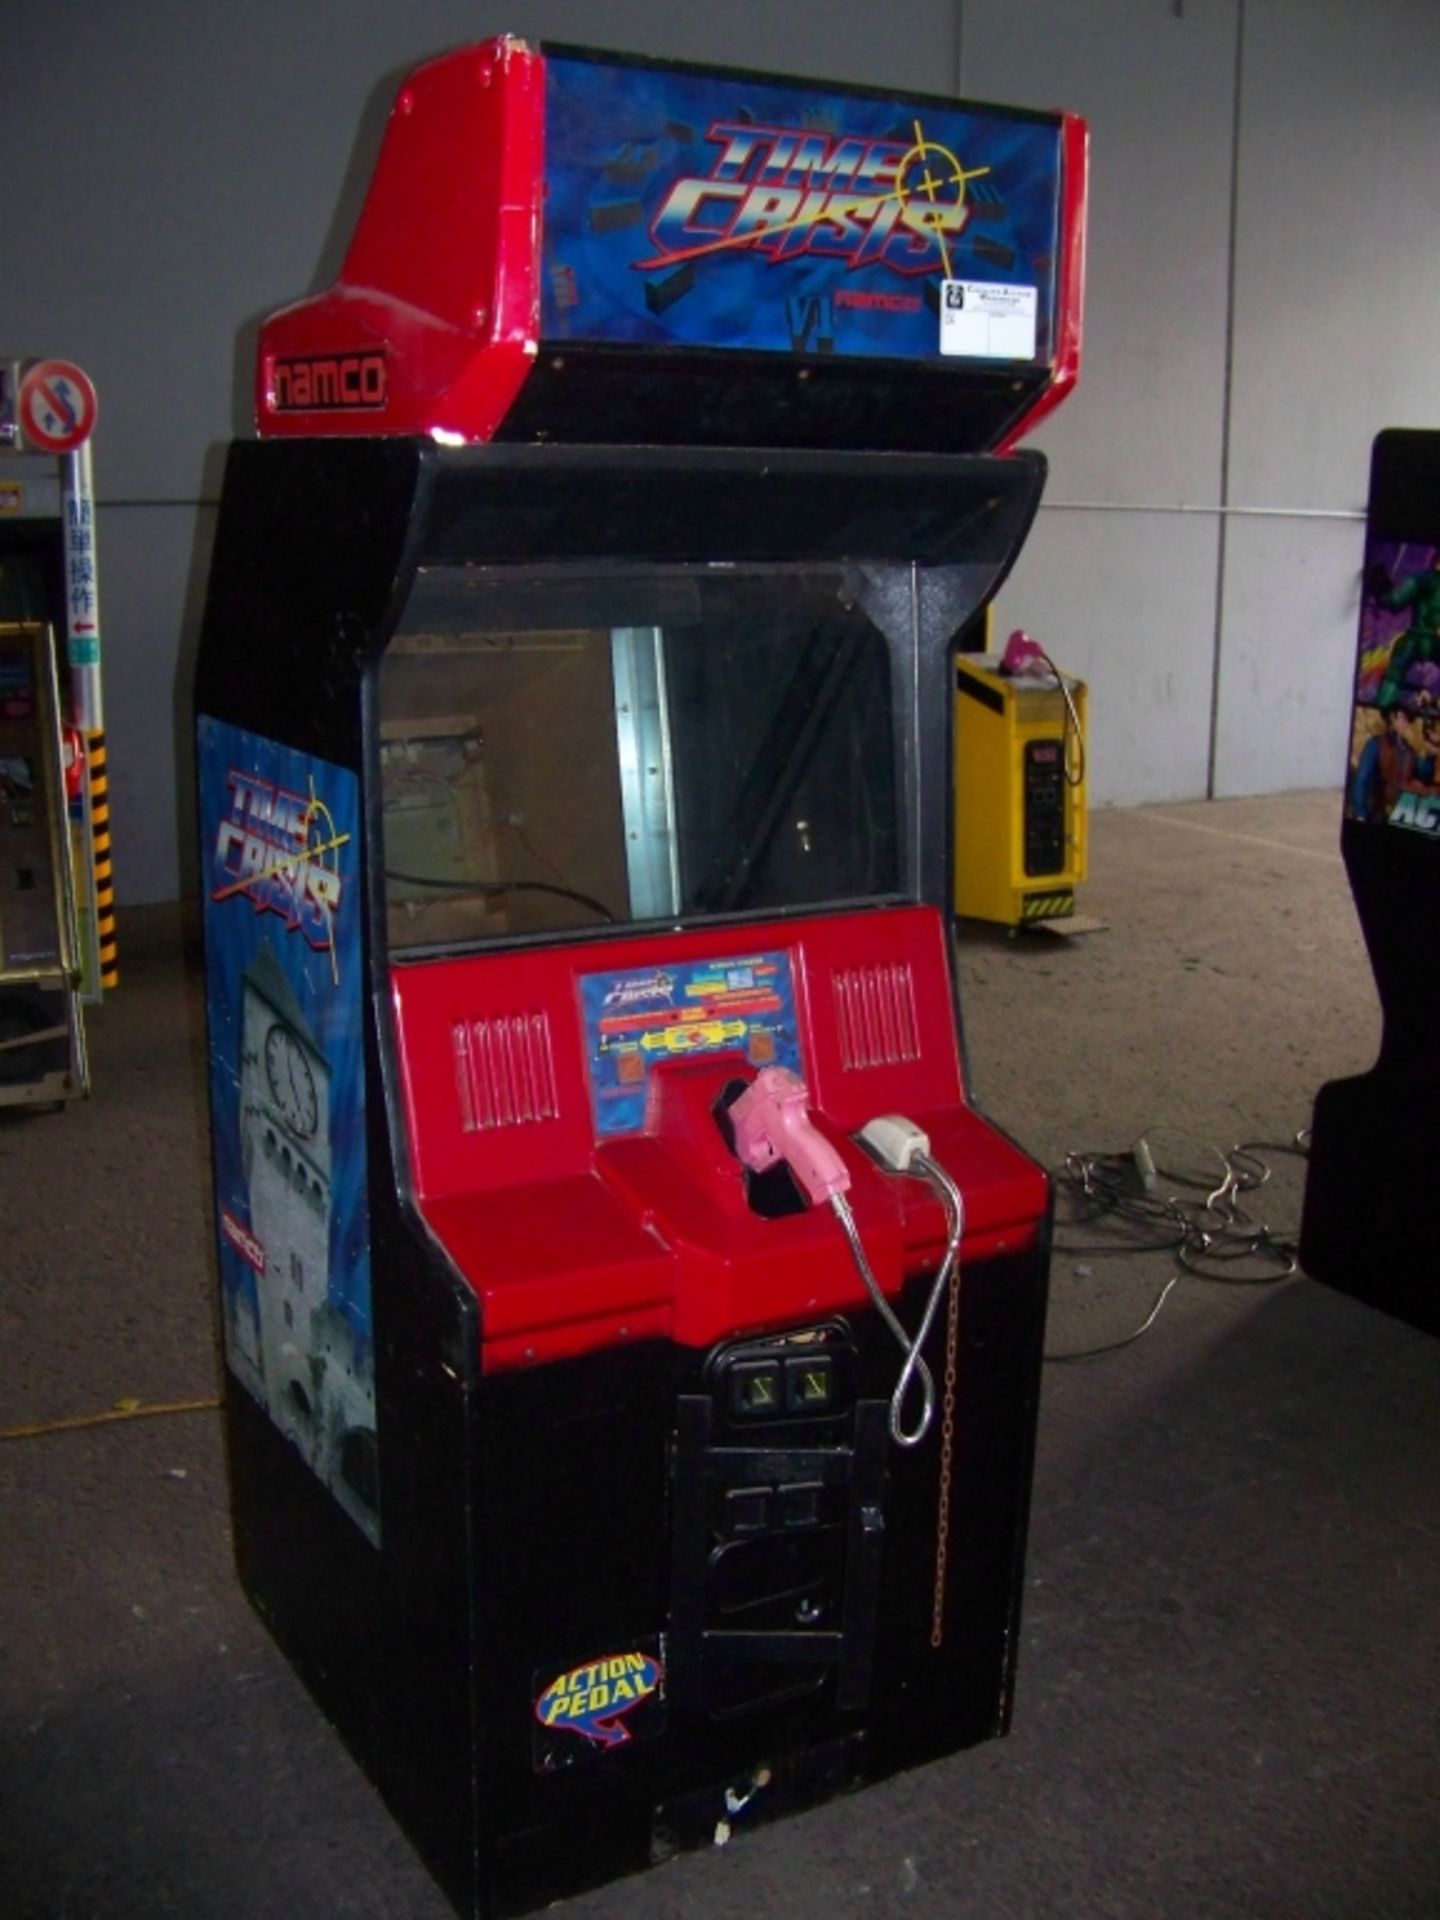 TIME CRISIS SHOOTER ARCADE GAME CABINET NAMCO - Image 2 of 3